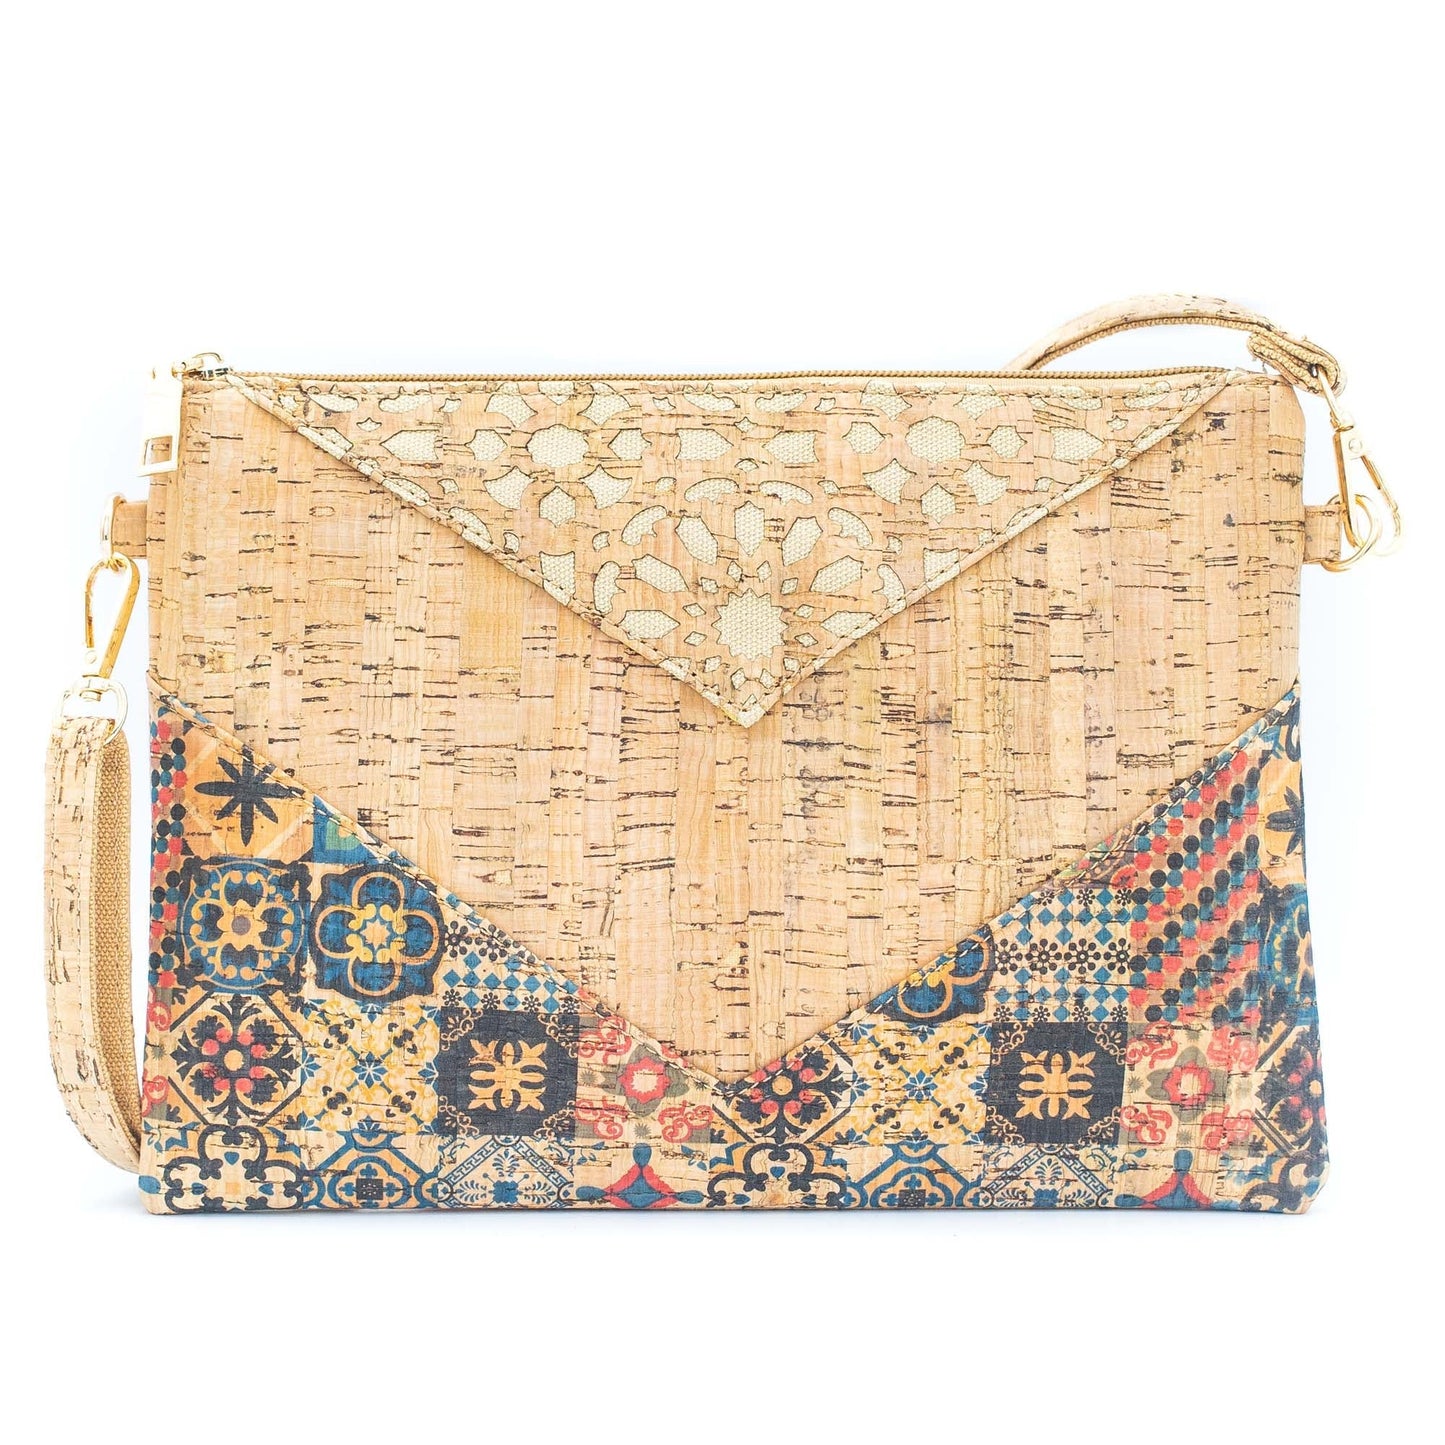 Arrow Patterned Natural Cork Vegan Sling Bags | THE CORK COLLECTION